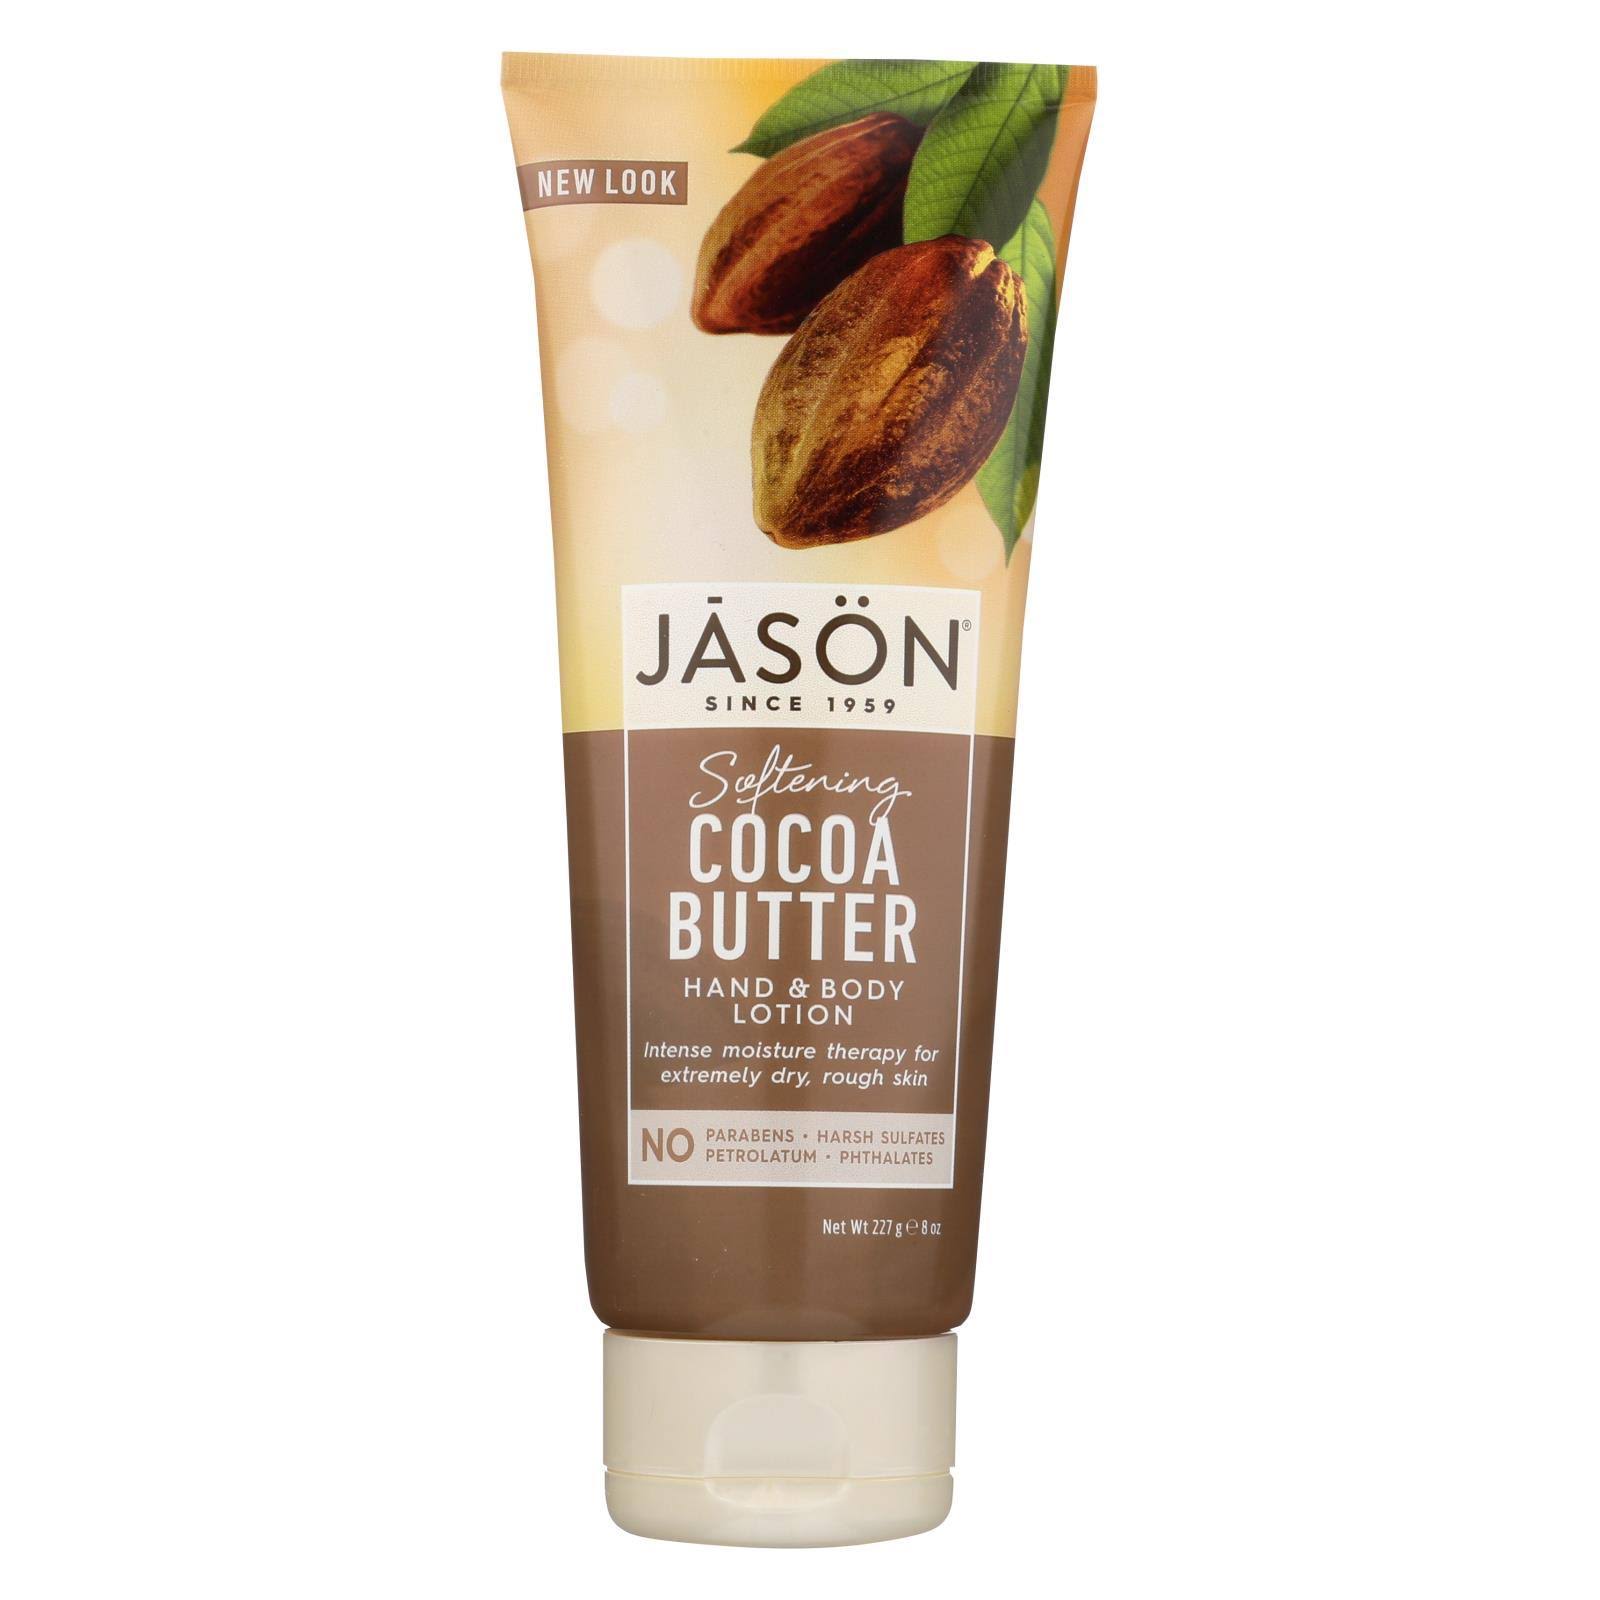 Jason Hand & Body Lotion - Cocoa Butter